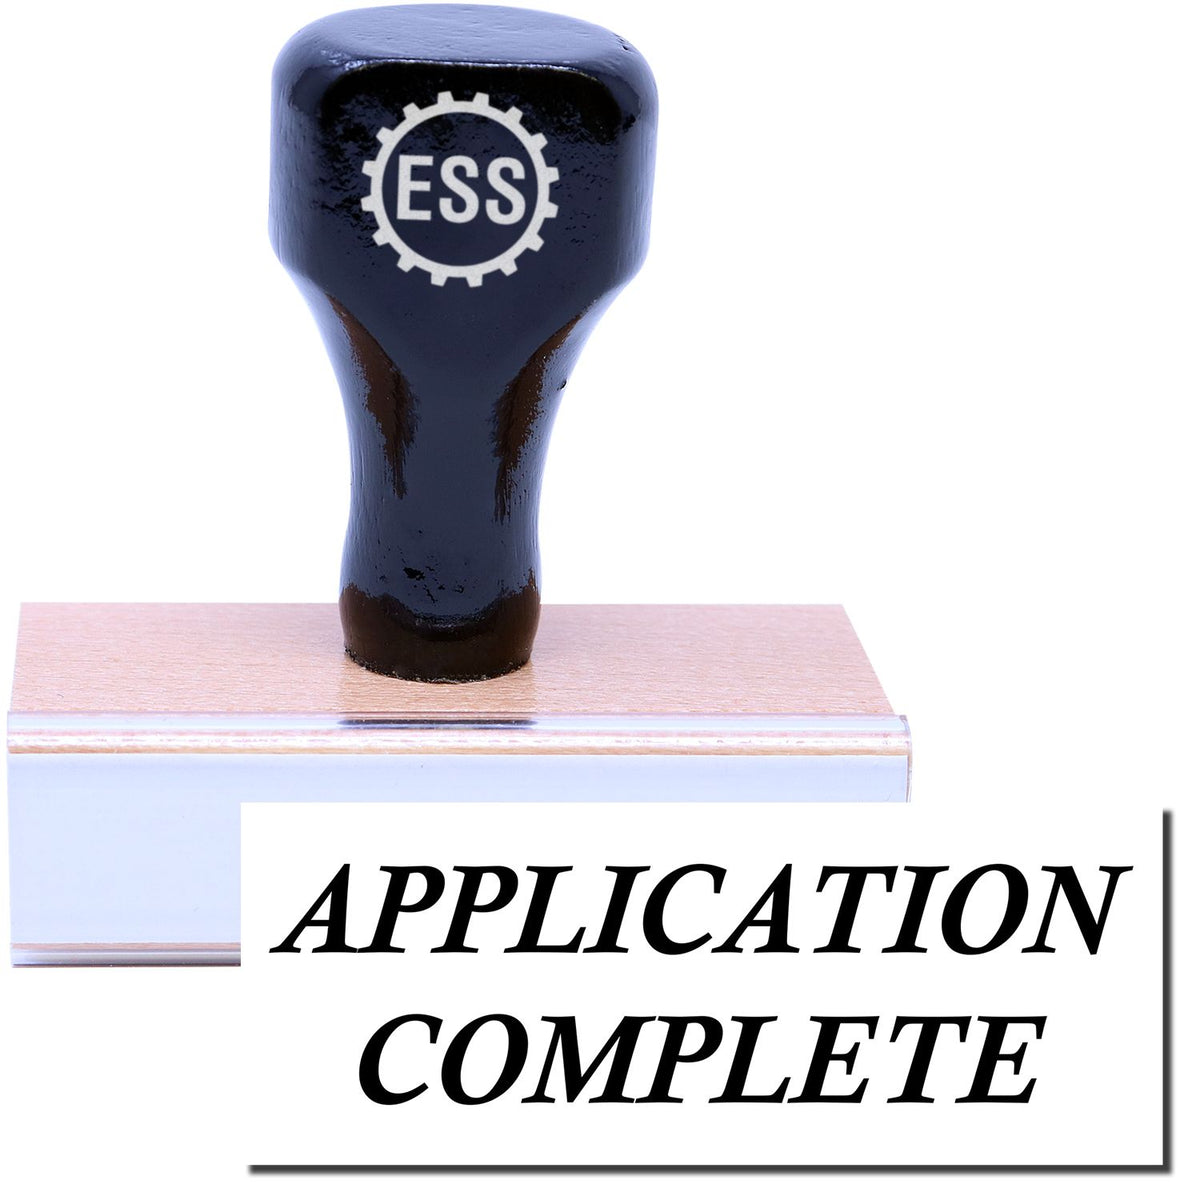 A stock office rubber stamp with a stamped image showing how the text &quot;APPLICATION COMPLETE&quot; is displayed after stamping.